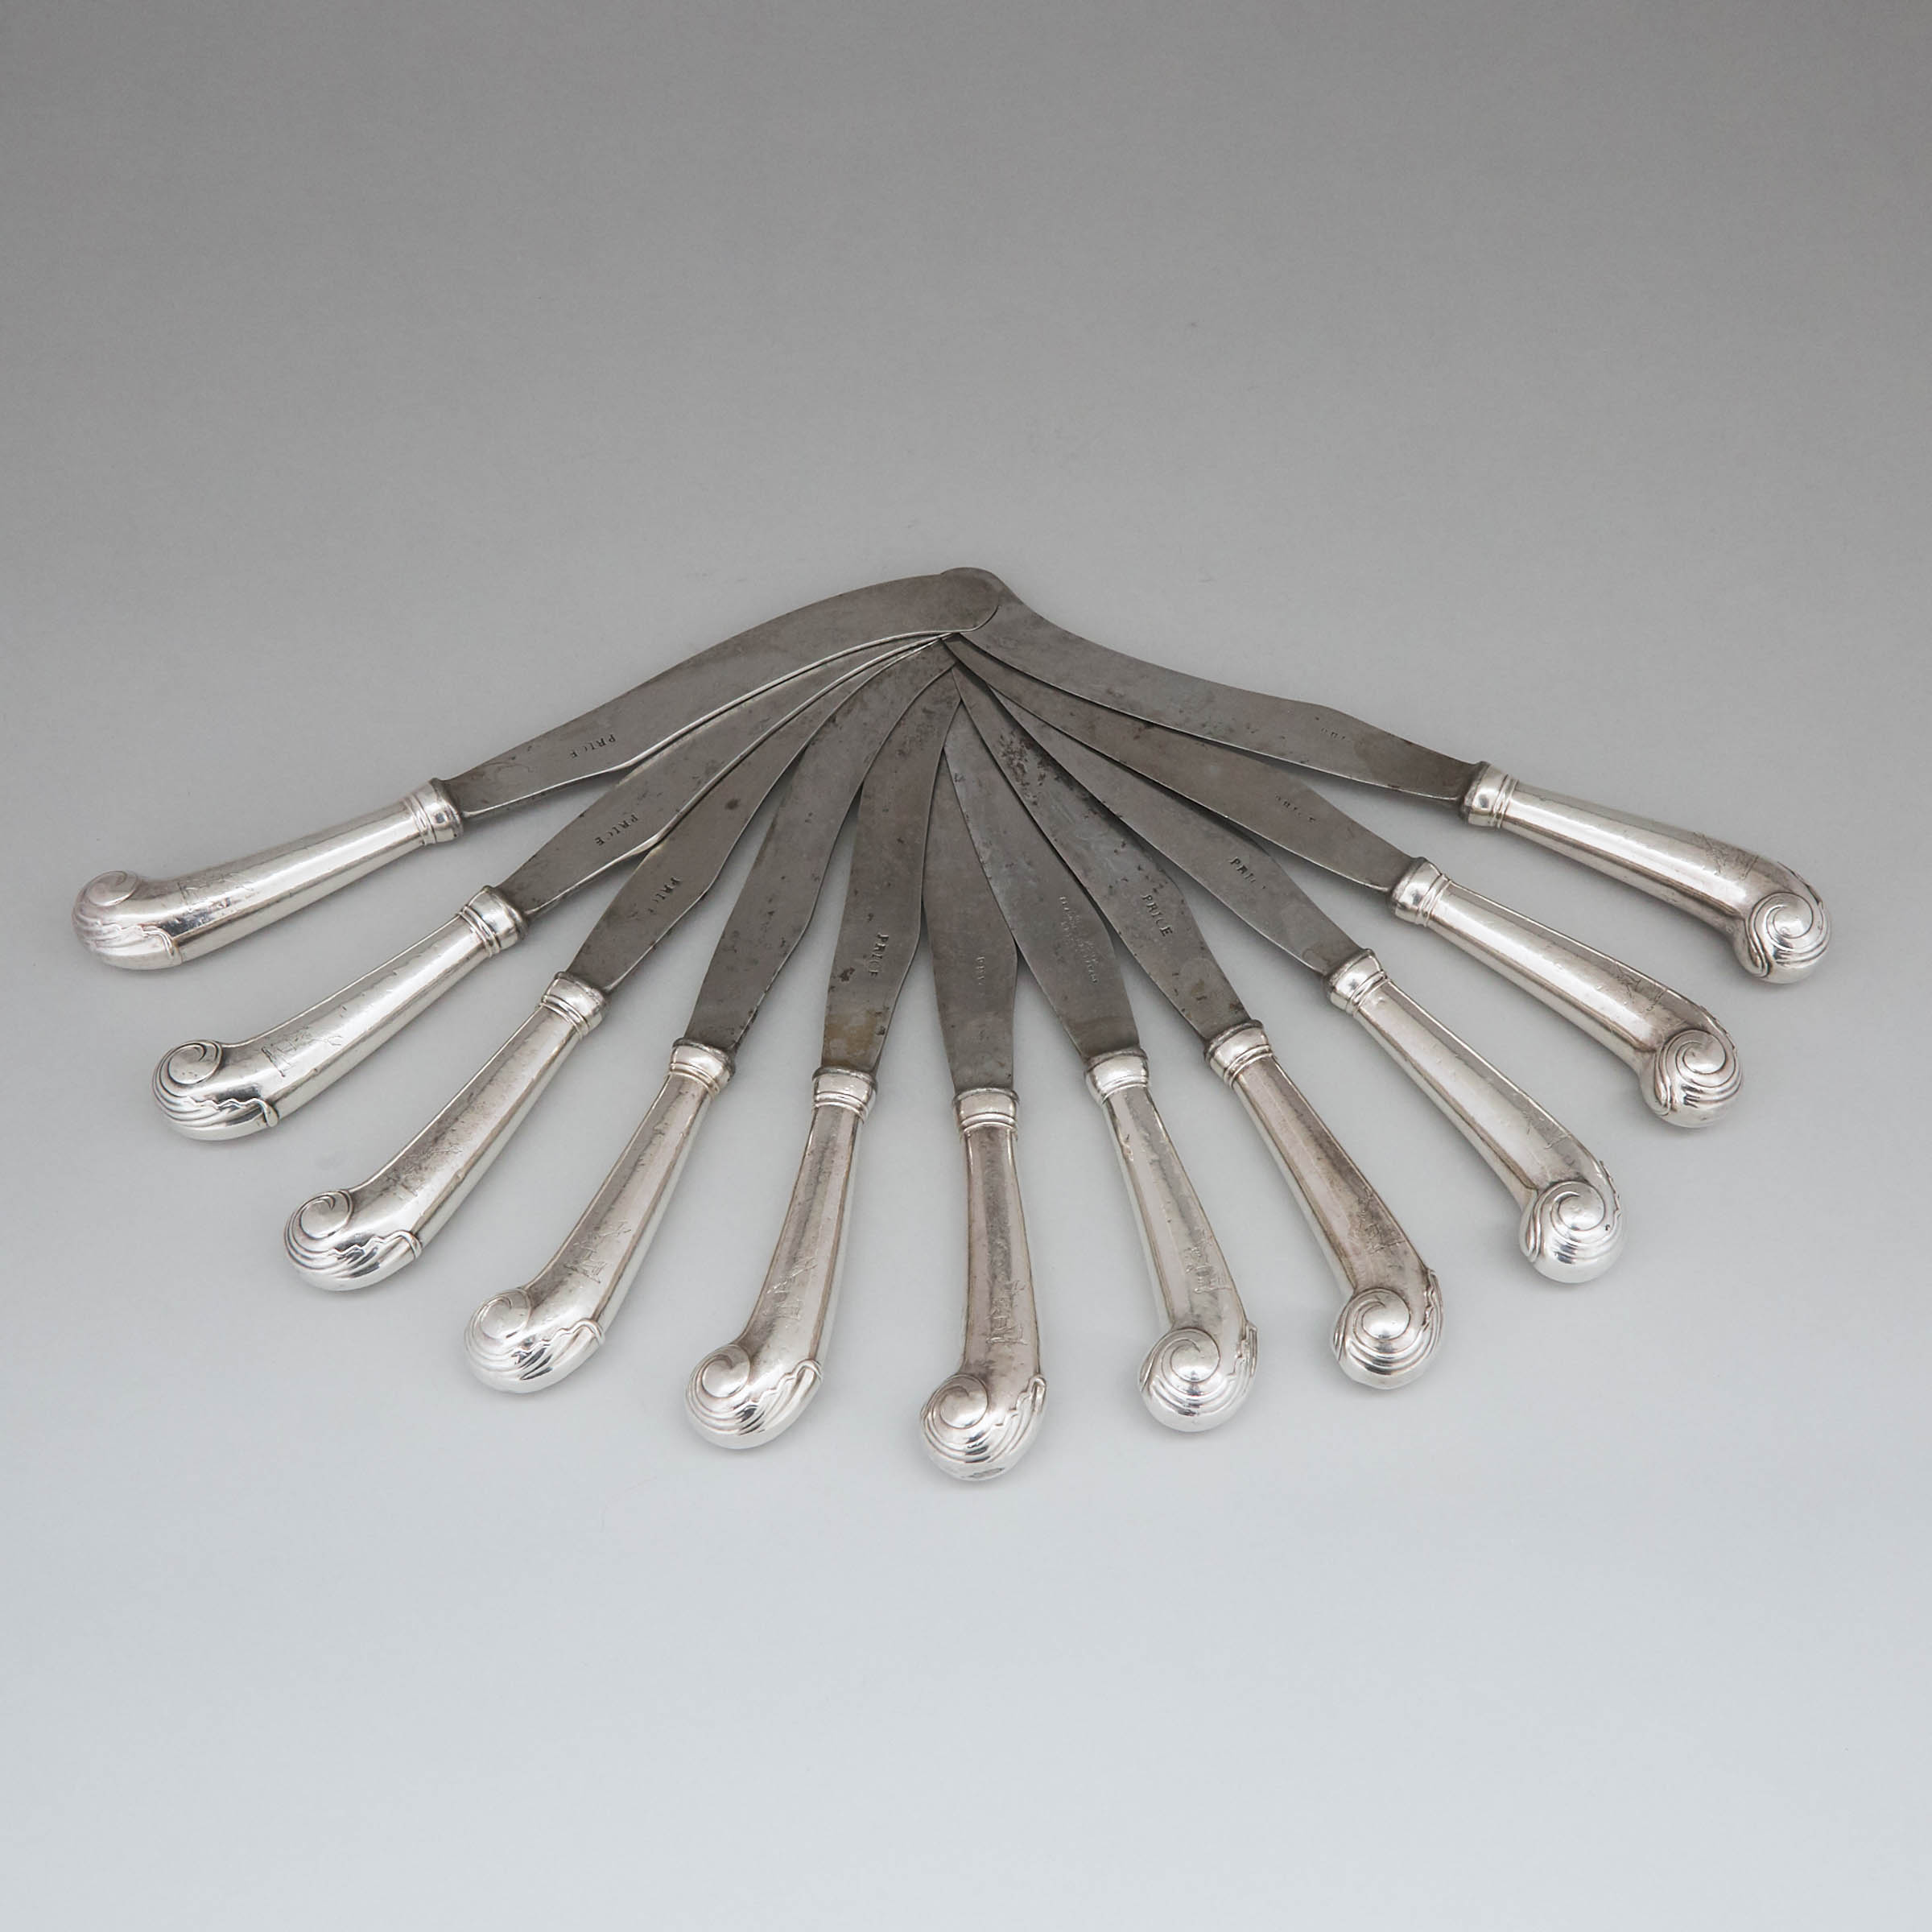 Eleven Georgian Silver Pistol Handled Table Knives, late 18th/early 19th century